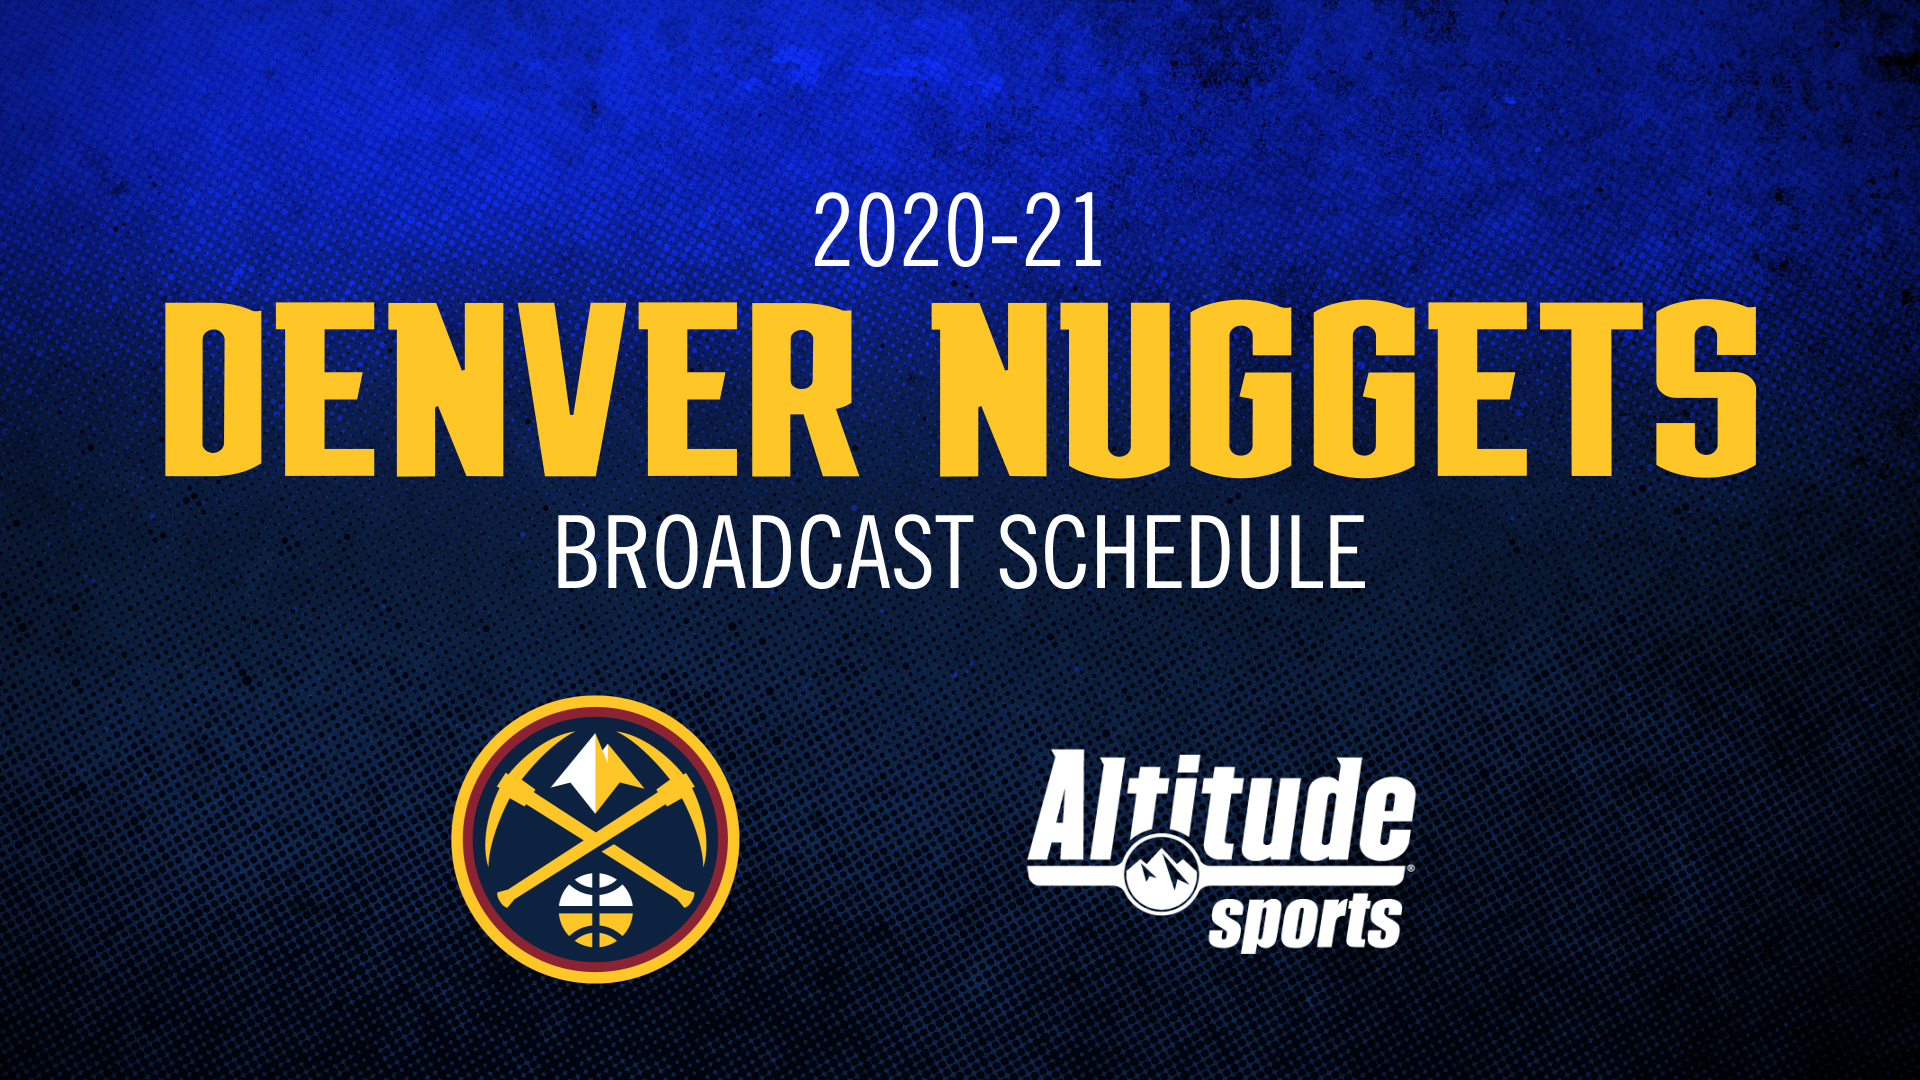 suns nuggets series schedule